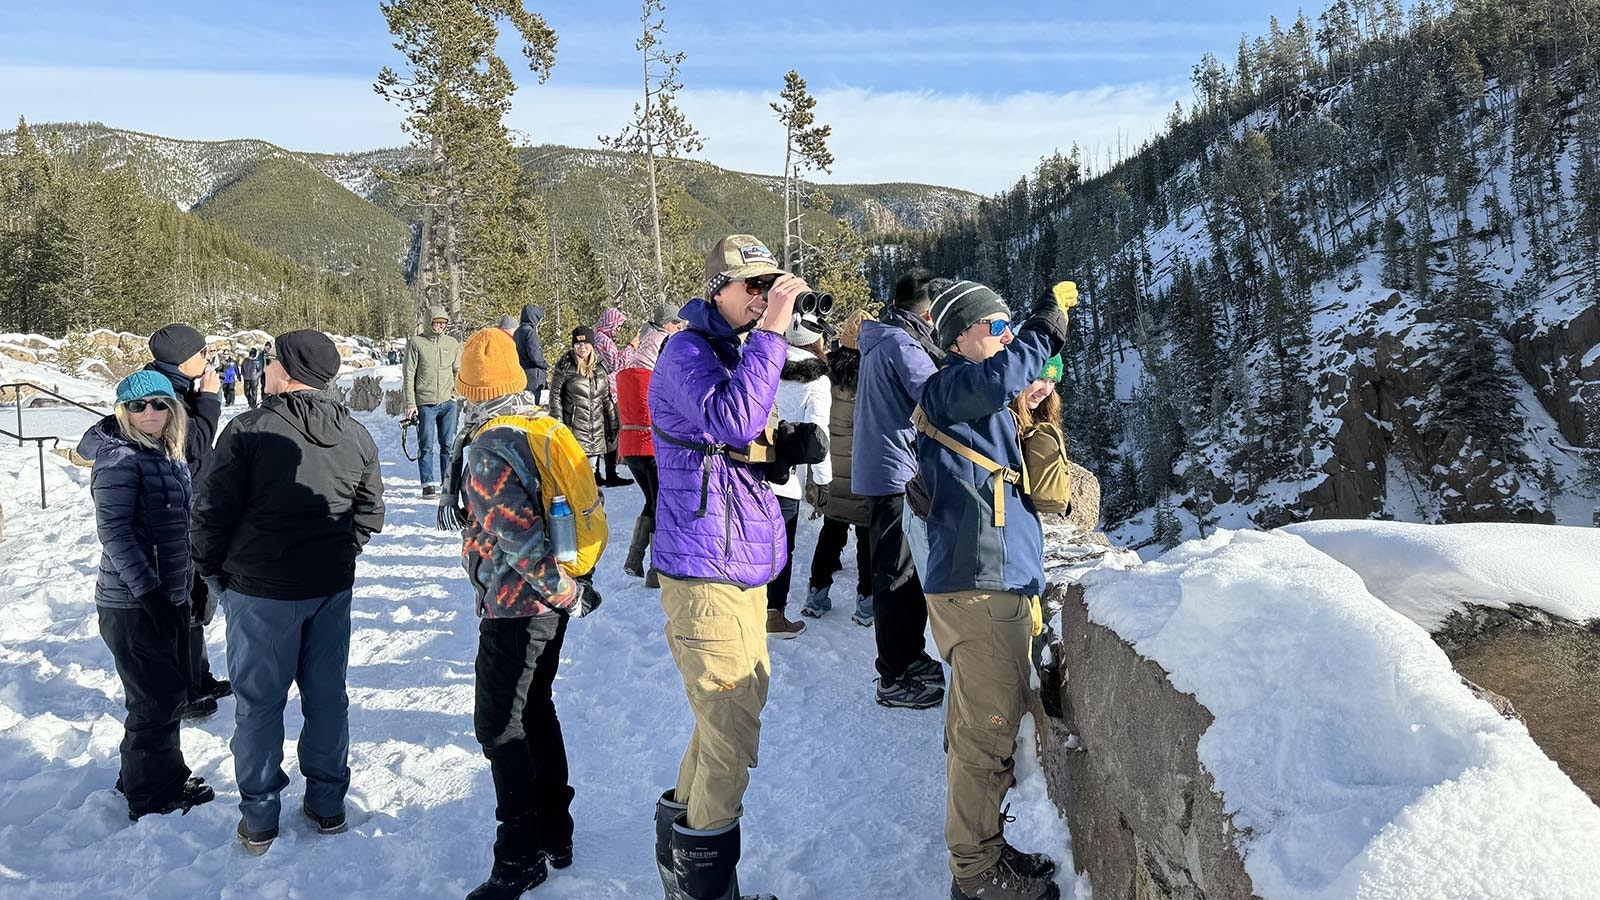 Taking photographs and learning more Yellowstone factoids at the Gibbon Falls overlook.